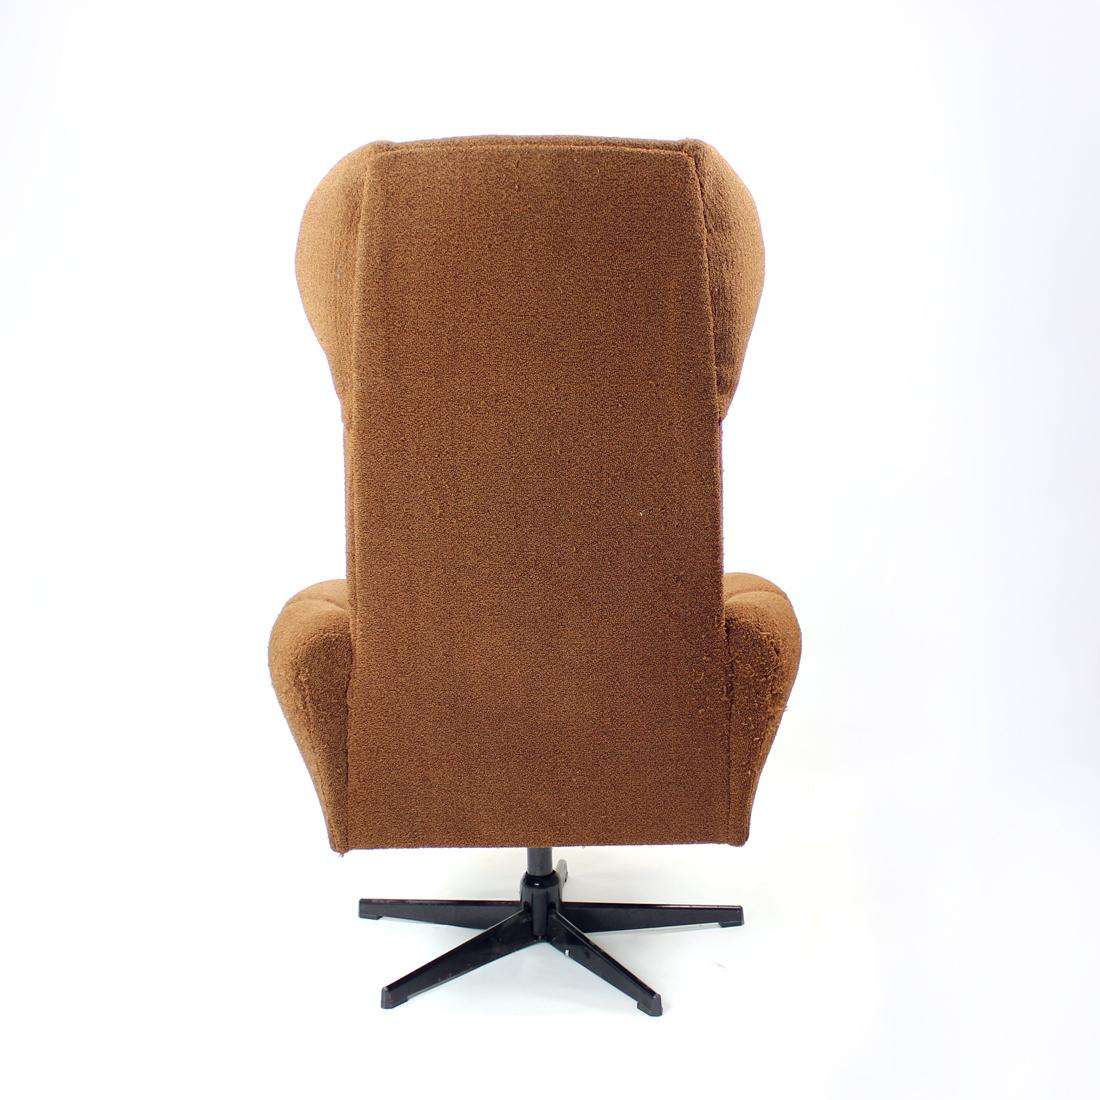 Steel Midcentury Wing Swivel Chair in Brown Fabric, Czechoslovakia, 1960s For Sale